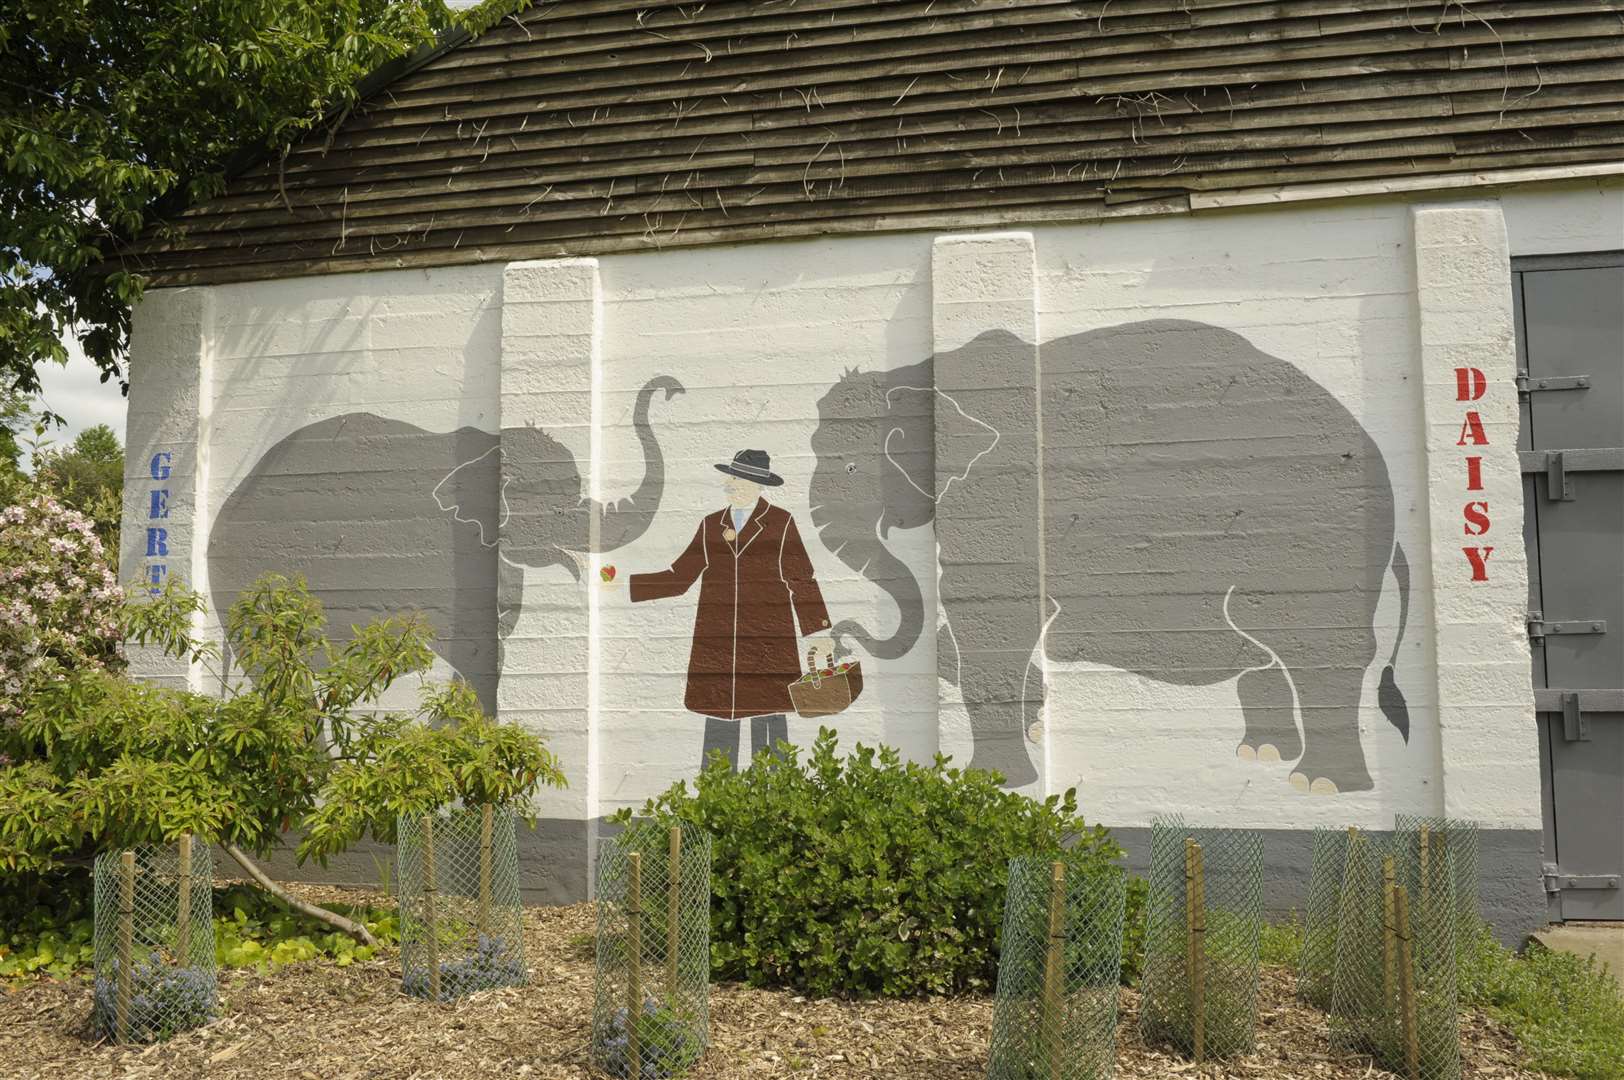 Learn about Gert and Daisy the elephants once at Cobtree Picture: Steve Crispe